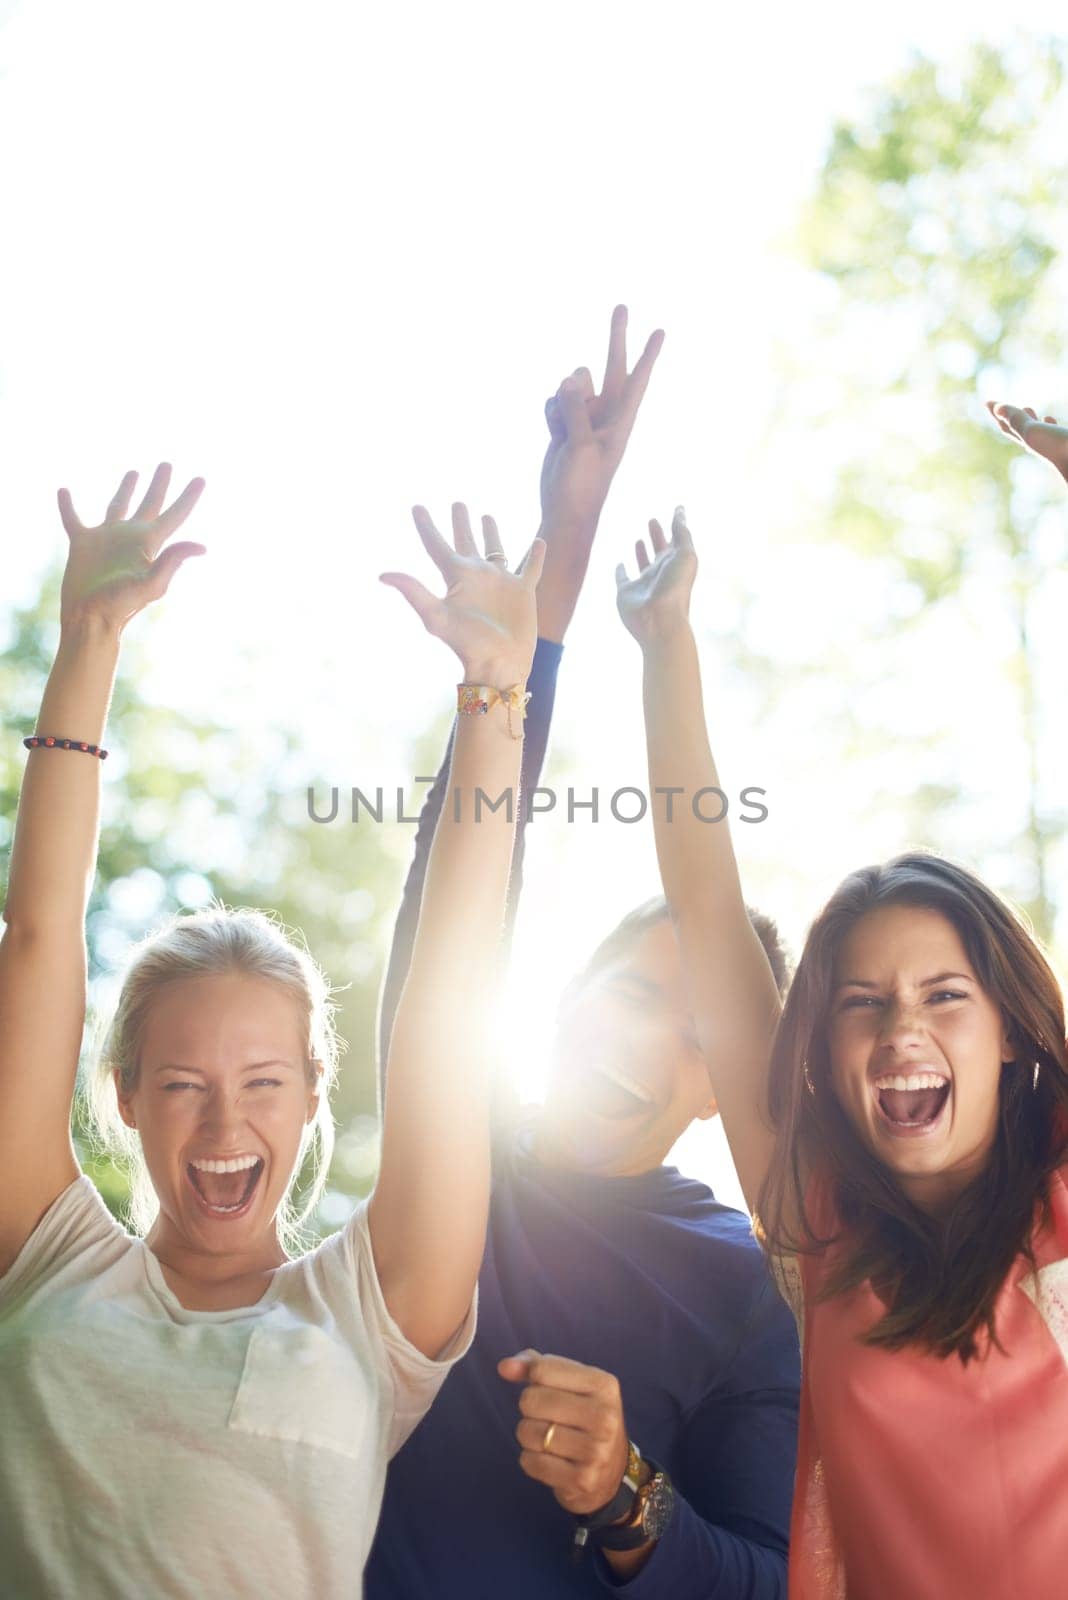 Portrait, outdoor and friends with party, happiness and social event with music festival, celebration and summer. Face, people or group with lens flare, sunshine or weekend break with joy or cheerful.